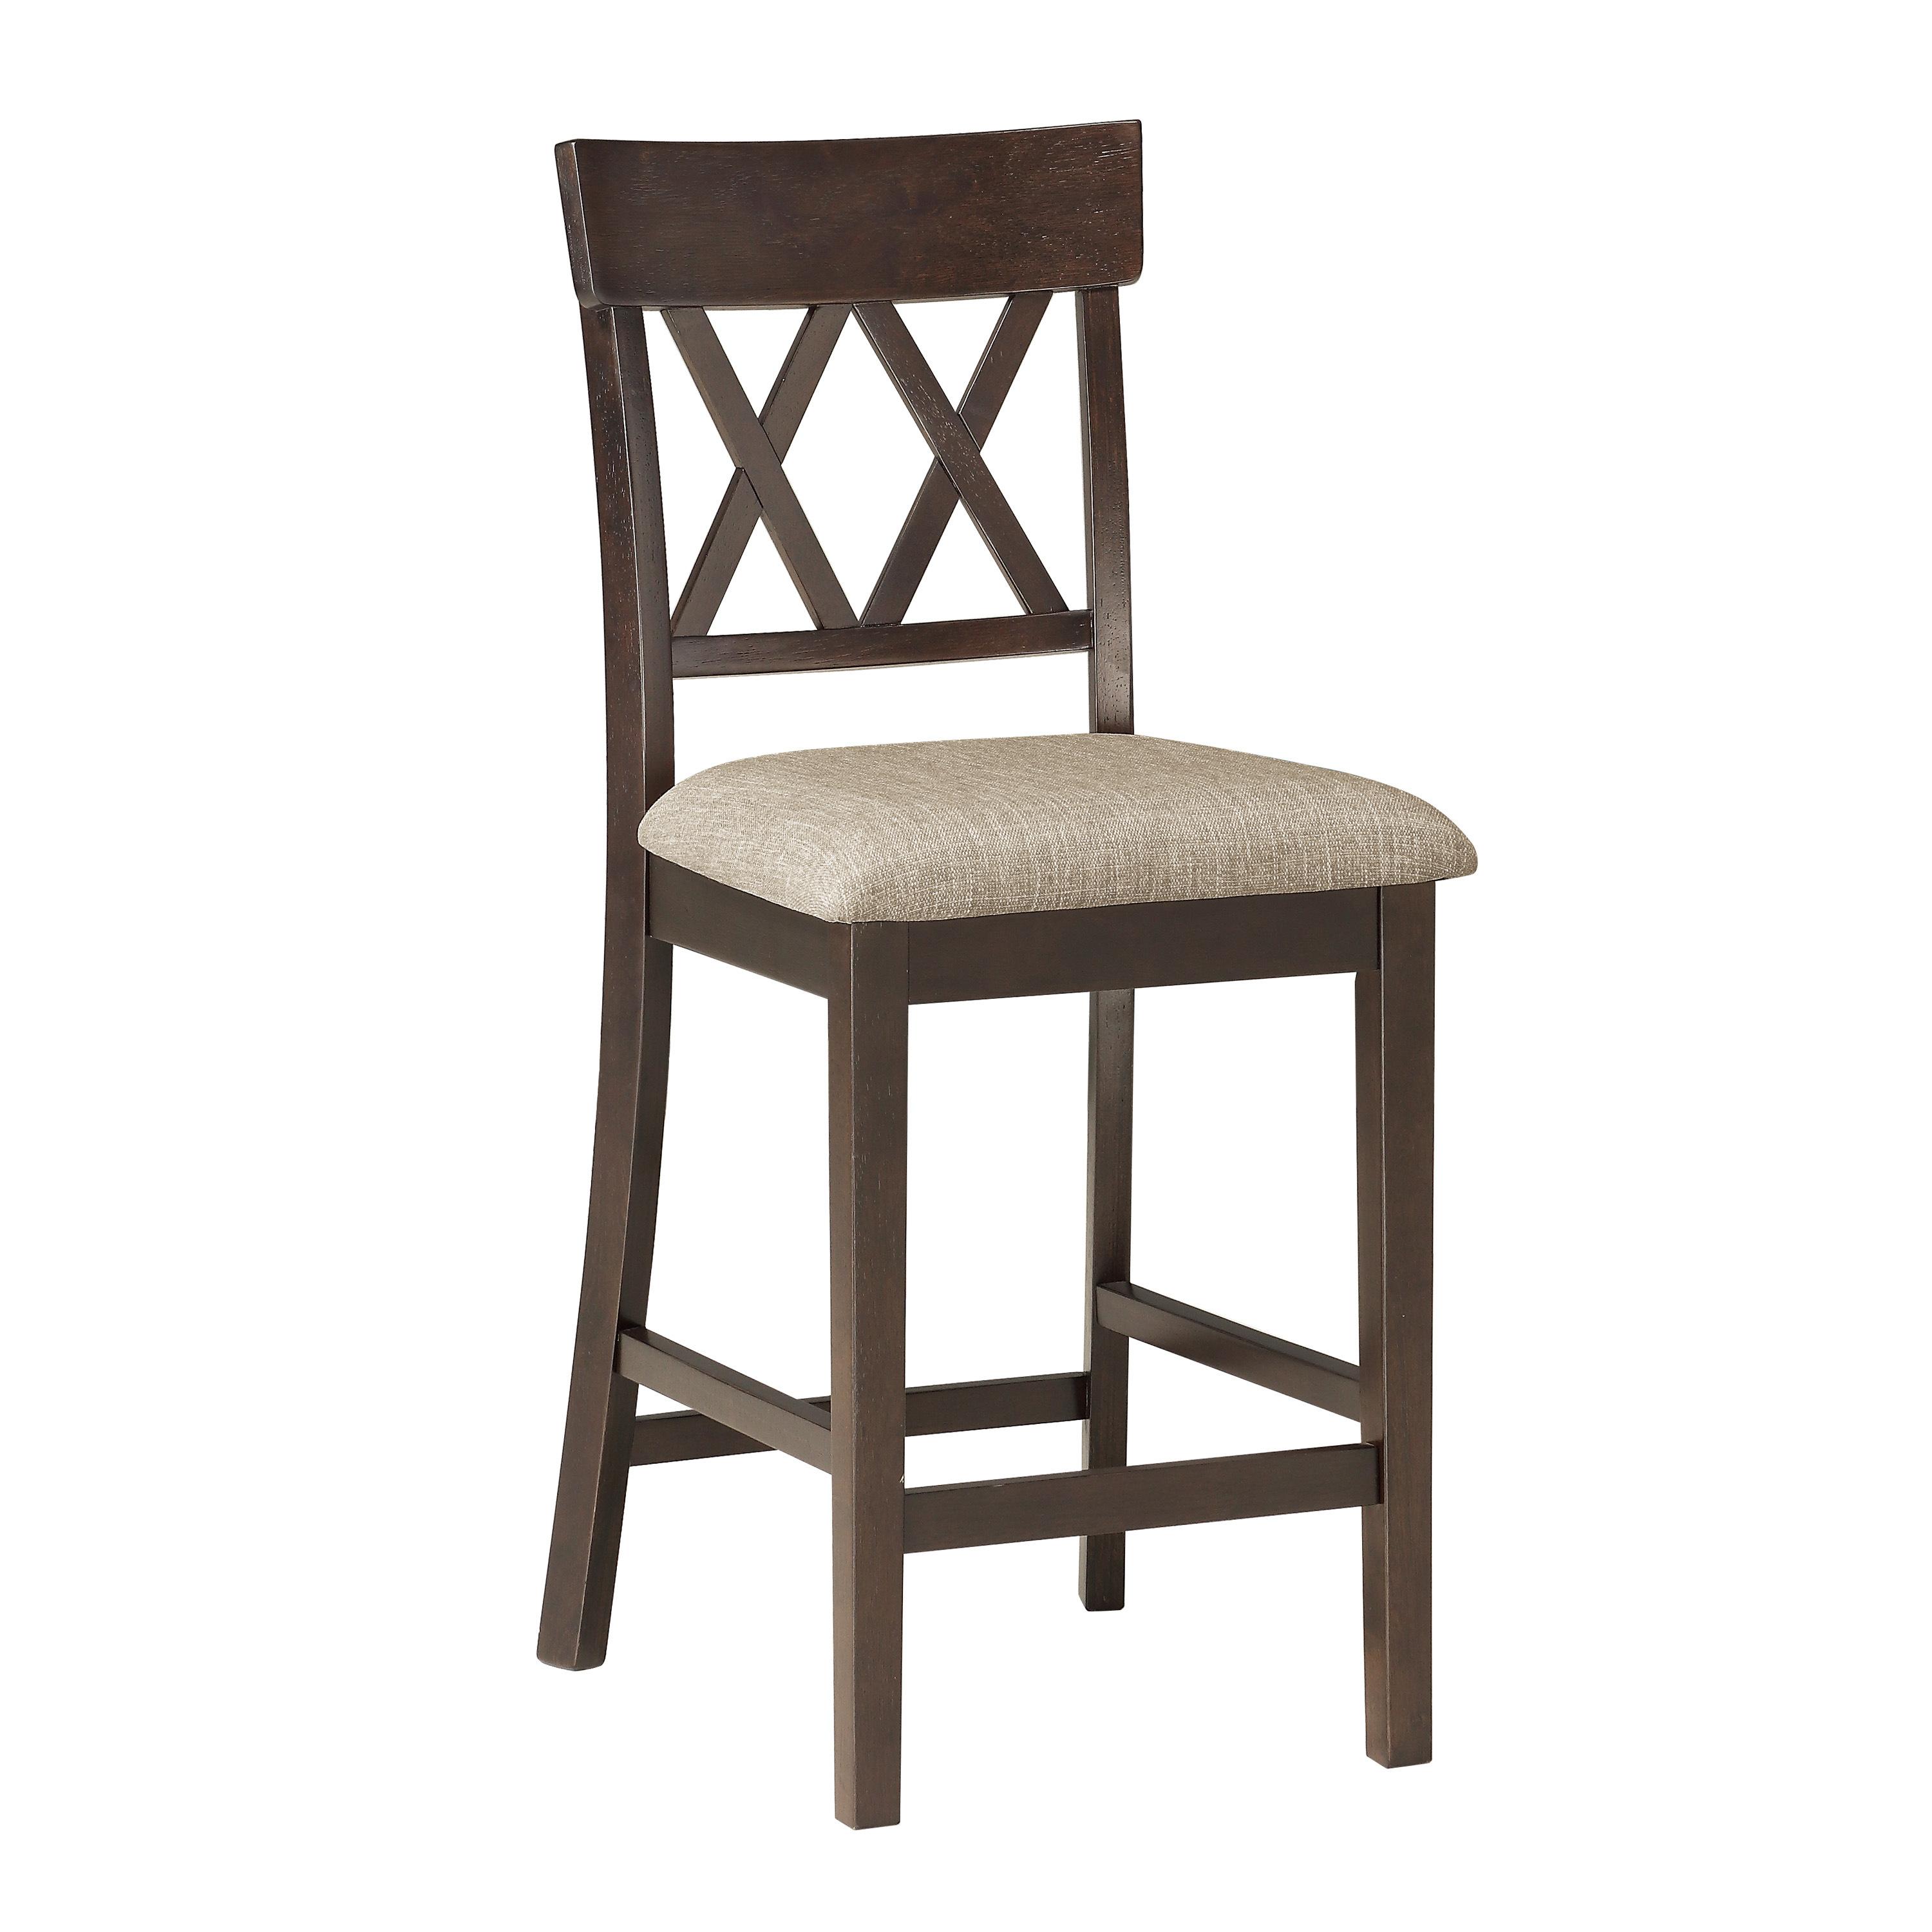 Rustic Counter Height Chair 5716-24S2 Balin 5716-24S2 in Dark Brown Polyester